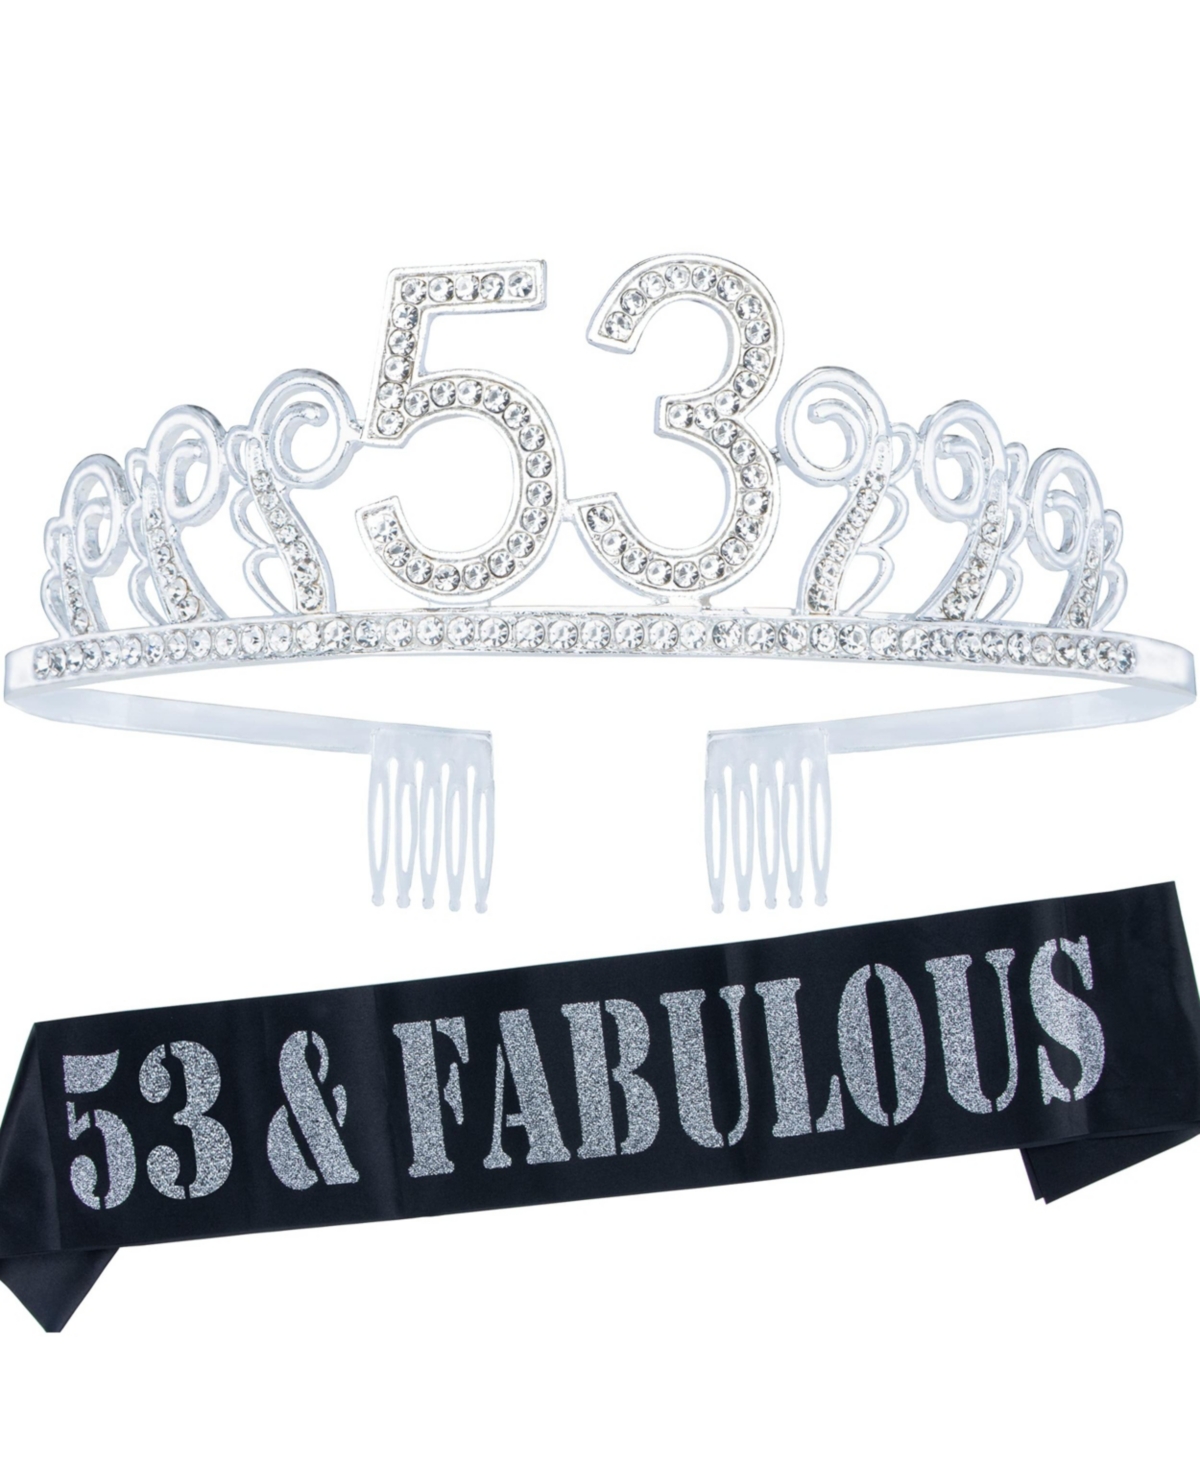 53rd Birthday Sash and Tiara for Women - Glitter Sash with Waves Rhinestone Silver Metal Tiara, Perfect 53rd Birthday Party Gifts and Accessories - Si